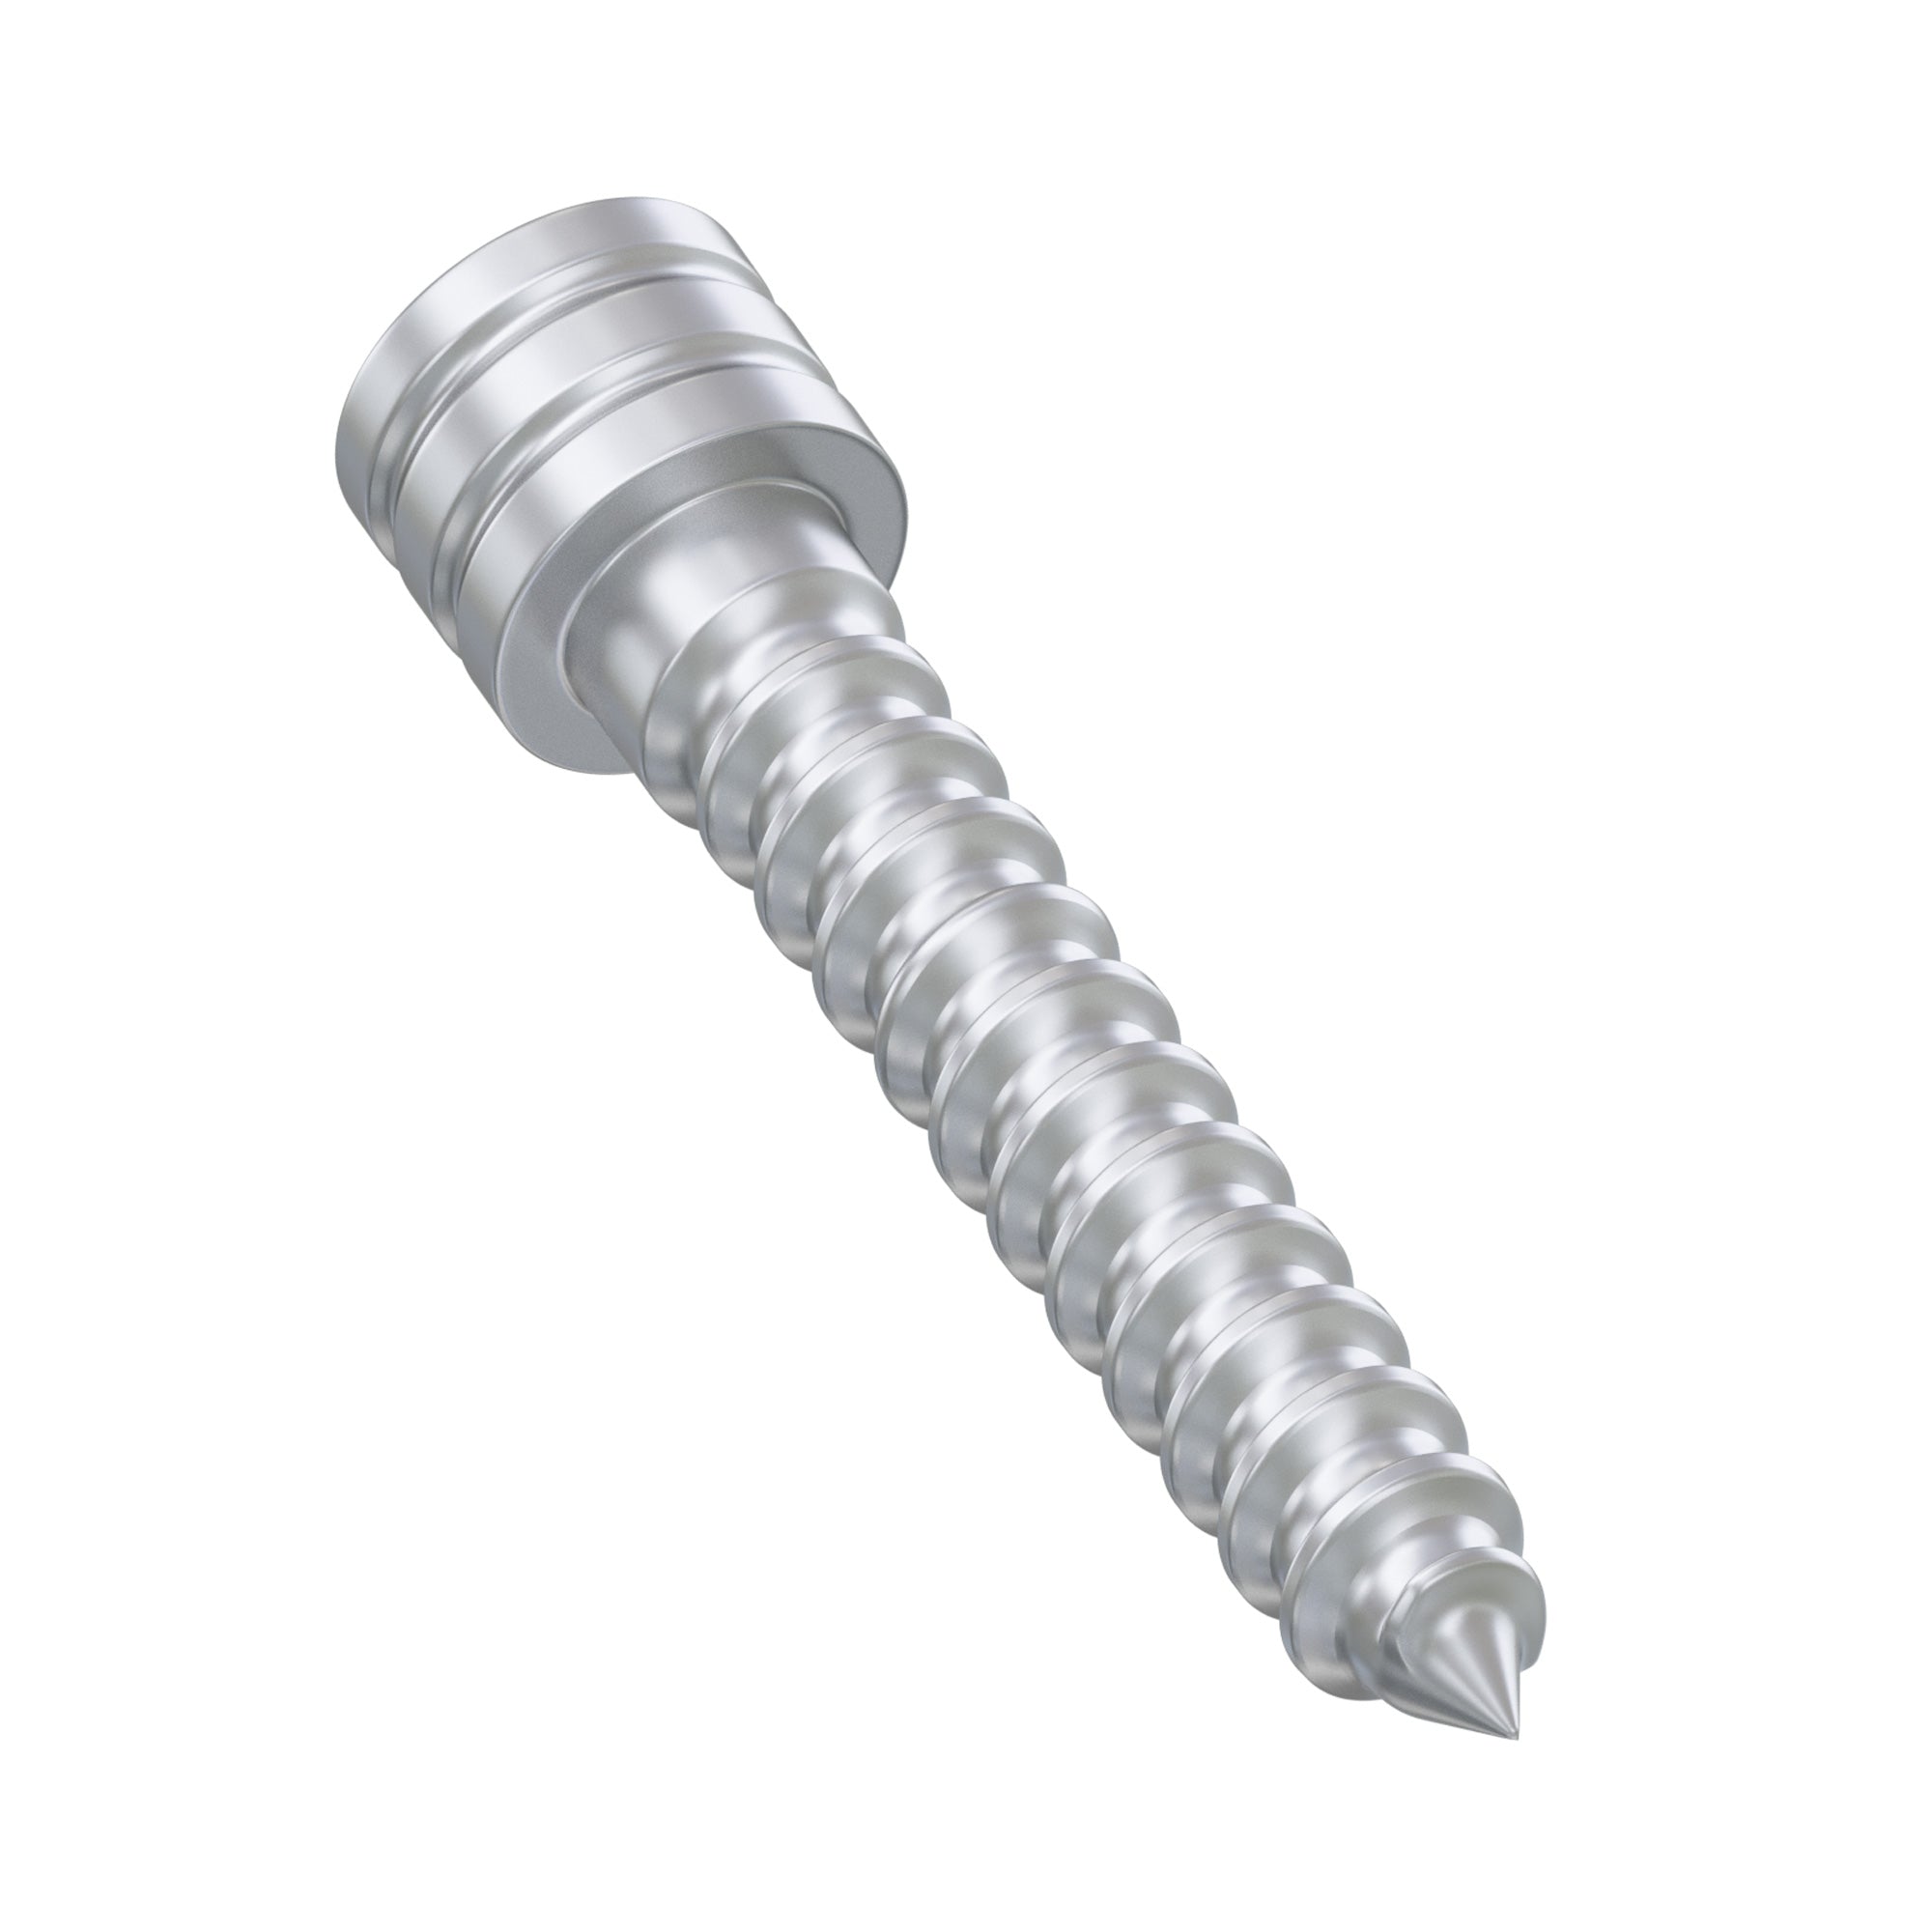 DSI Anchor Fixation Screw For Surgical Guide Appliance Stabilization